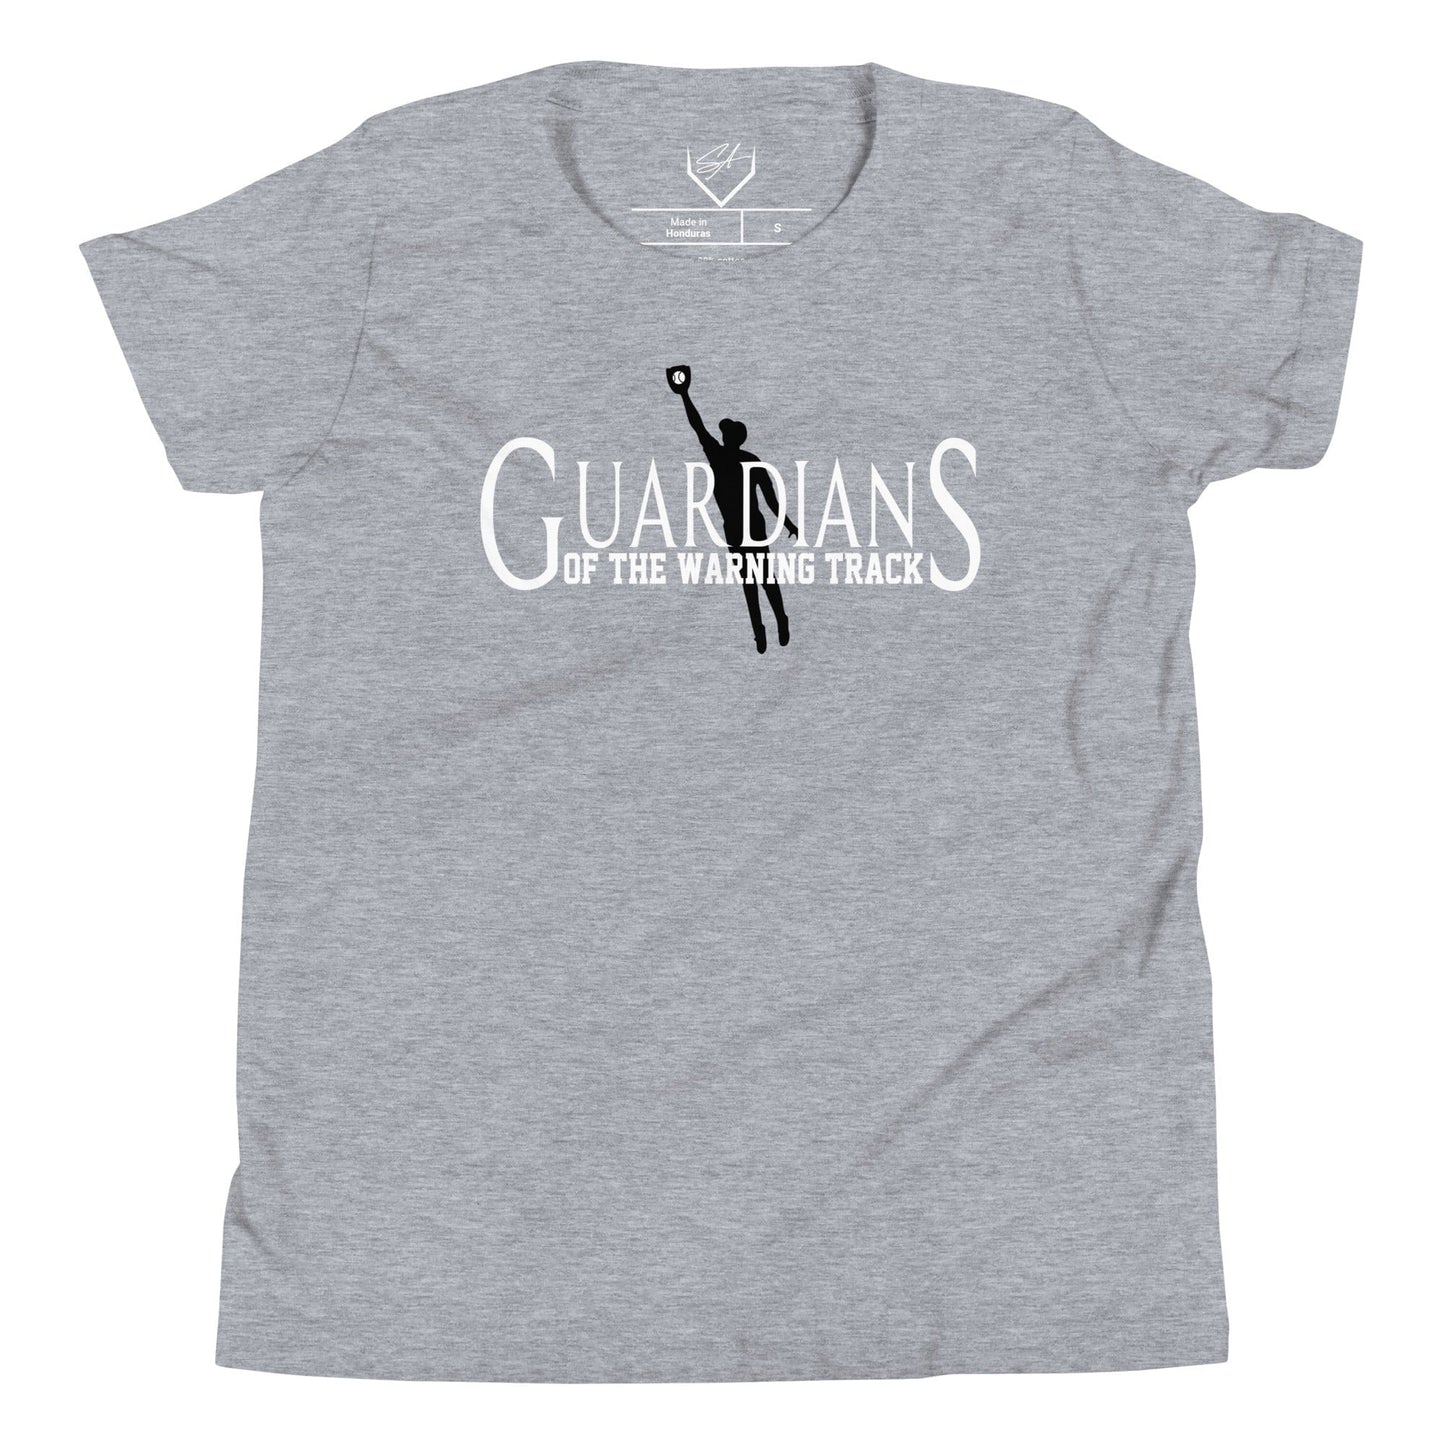 Guardians Of The Warning Track - Youth Tee